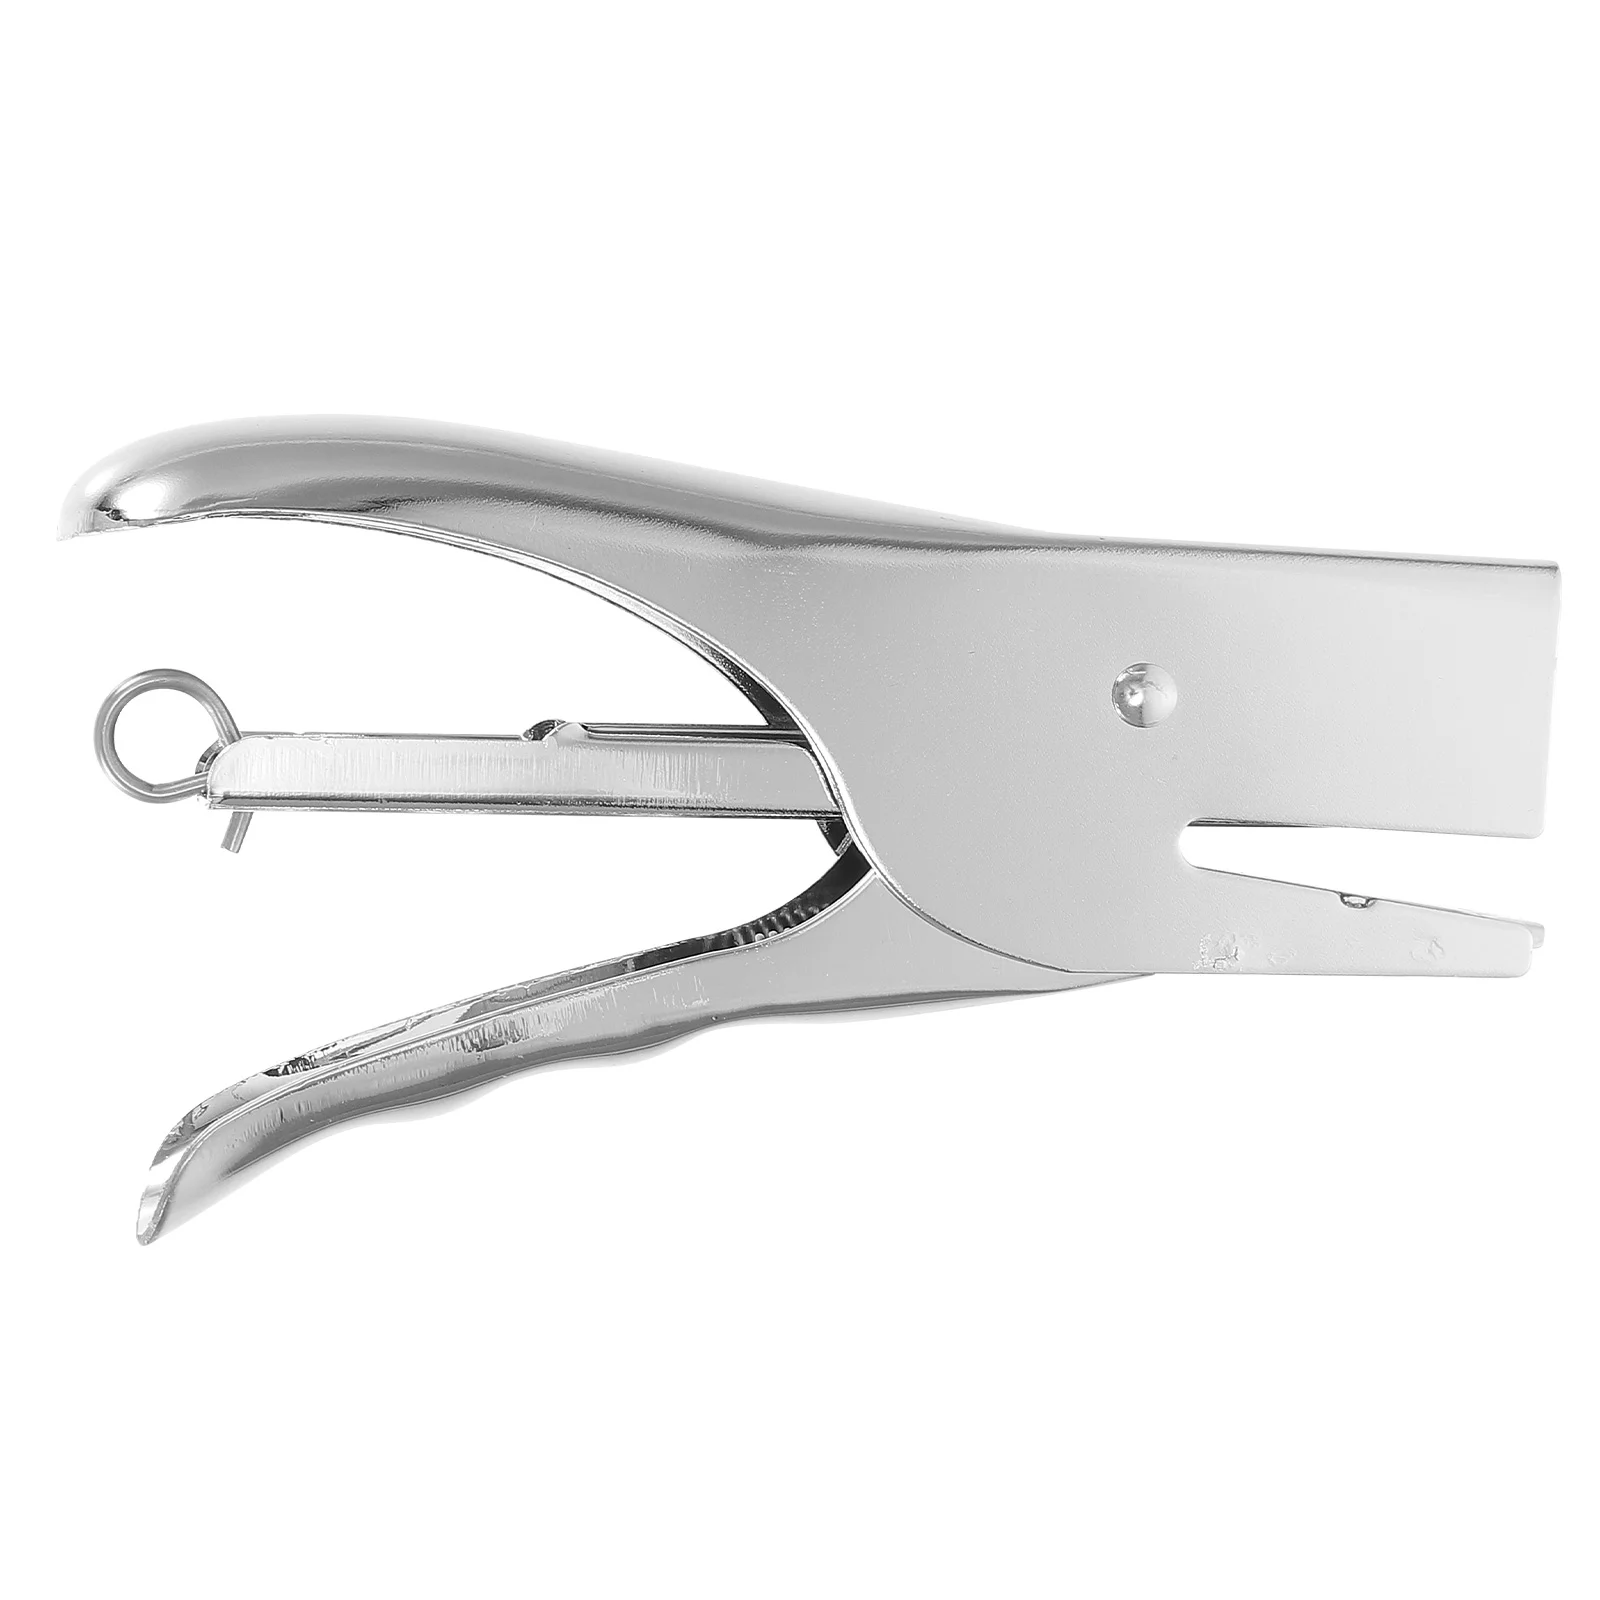 

1pc 20 Sheets Plier Stapler No-Jam Hand Grip Metal Stapler Save Effort Stapler without Stitching Needle (Silver) Upholstery